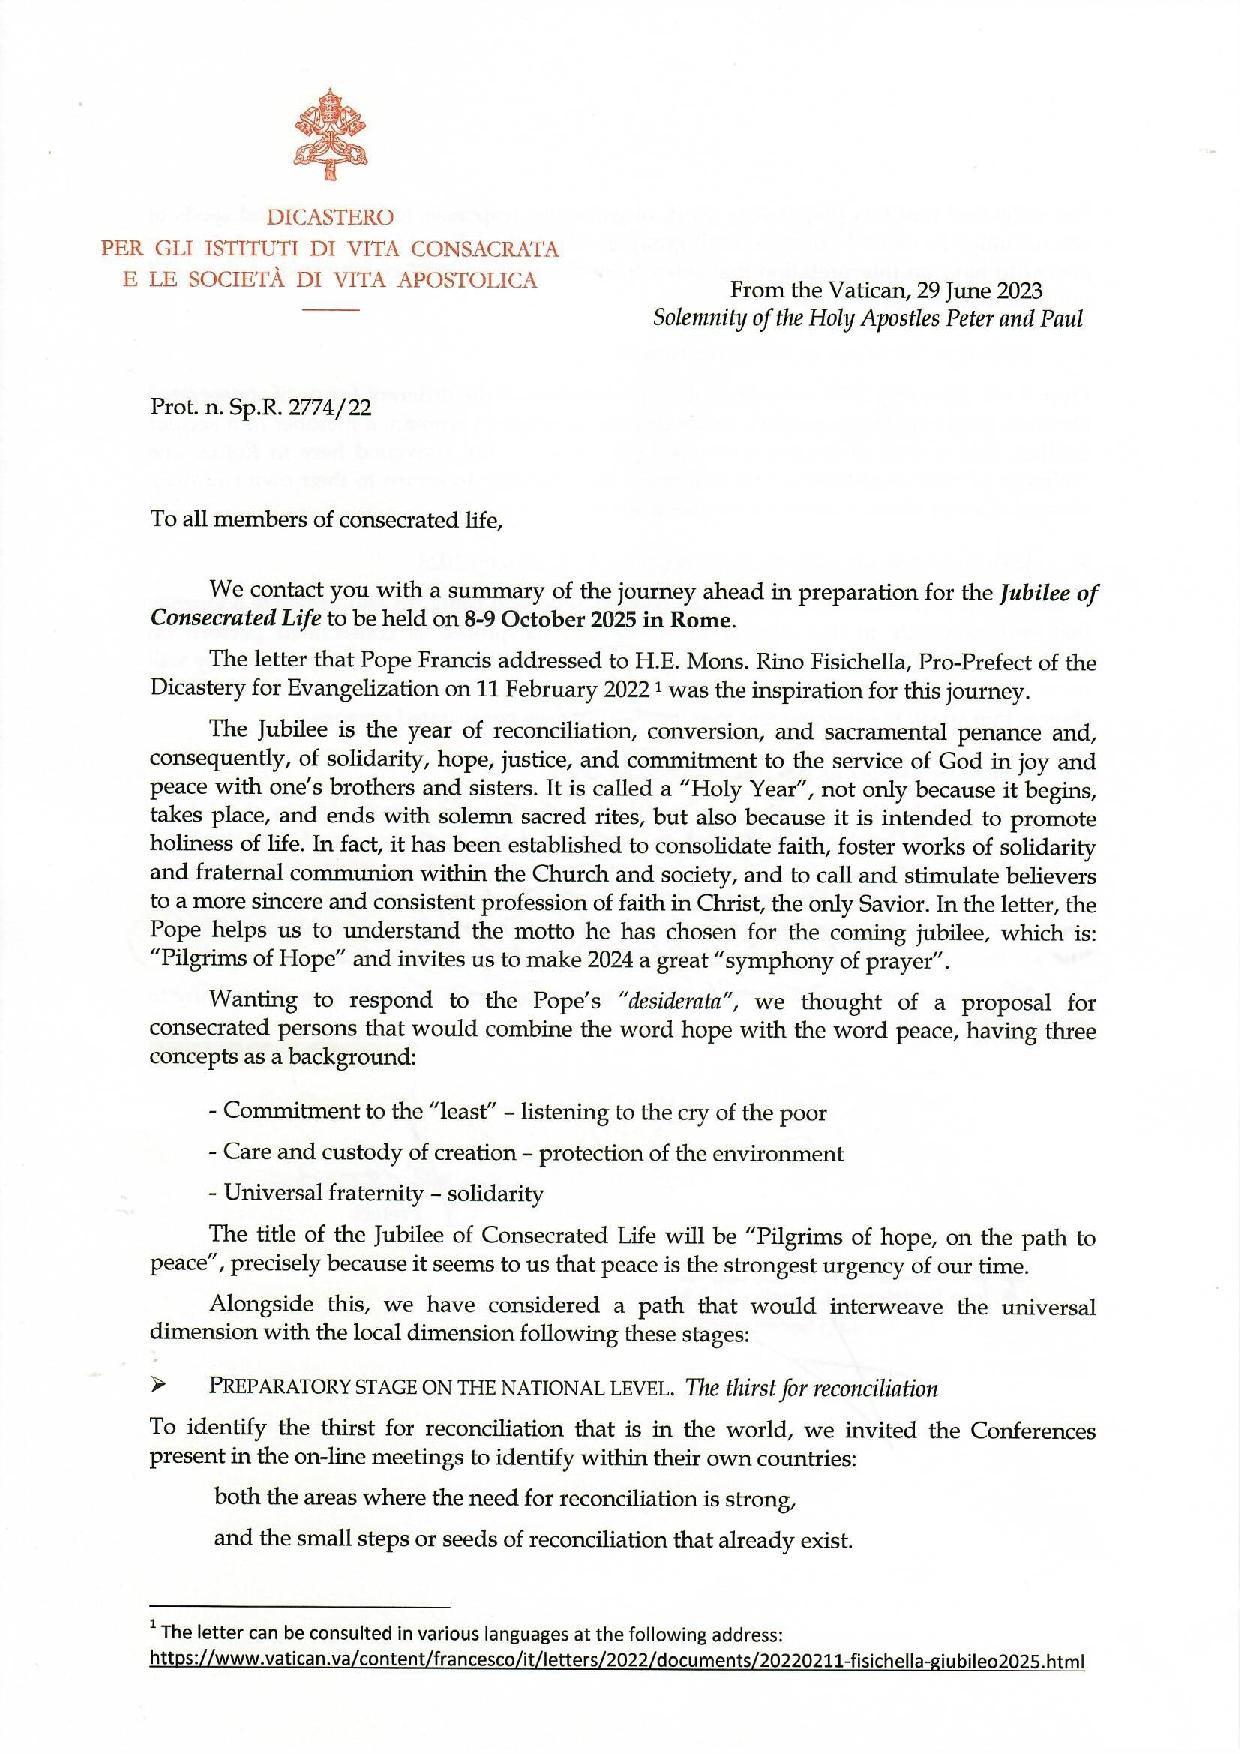 IUBILAEUM 2025 - EN - To all members of consecrated life (1)-page-001.jpg